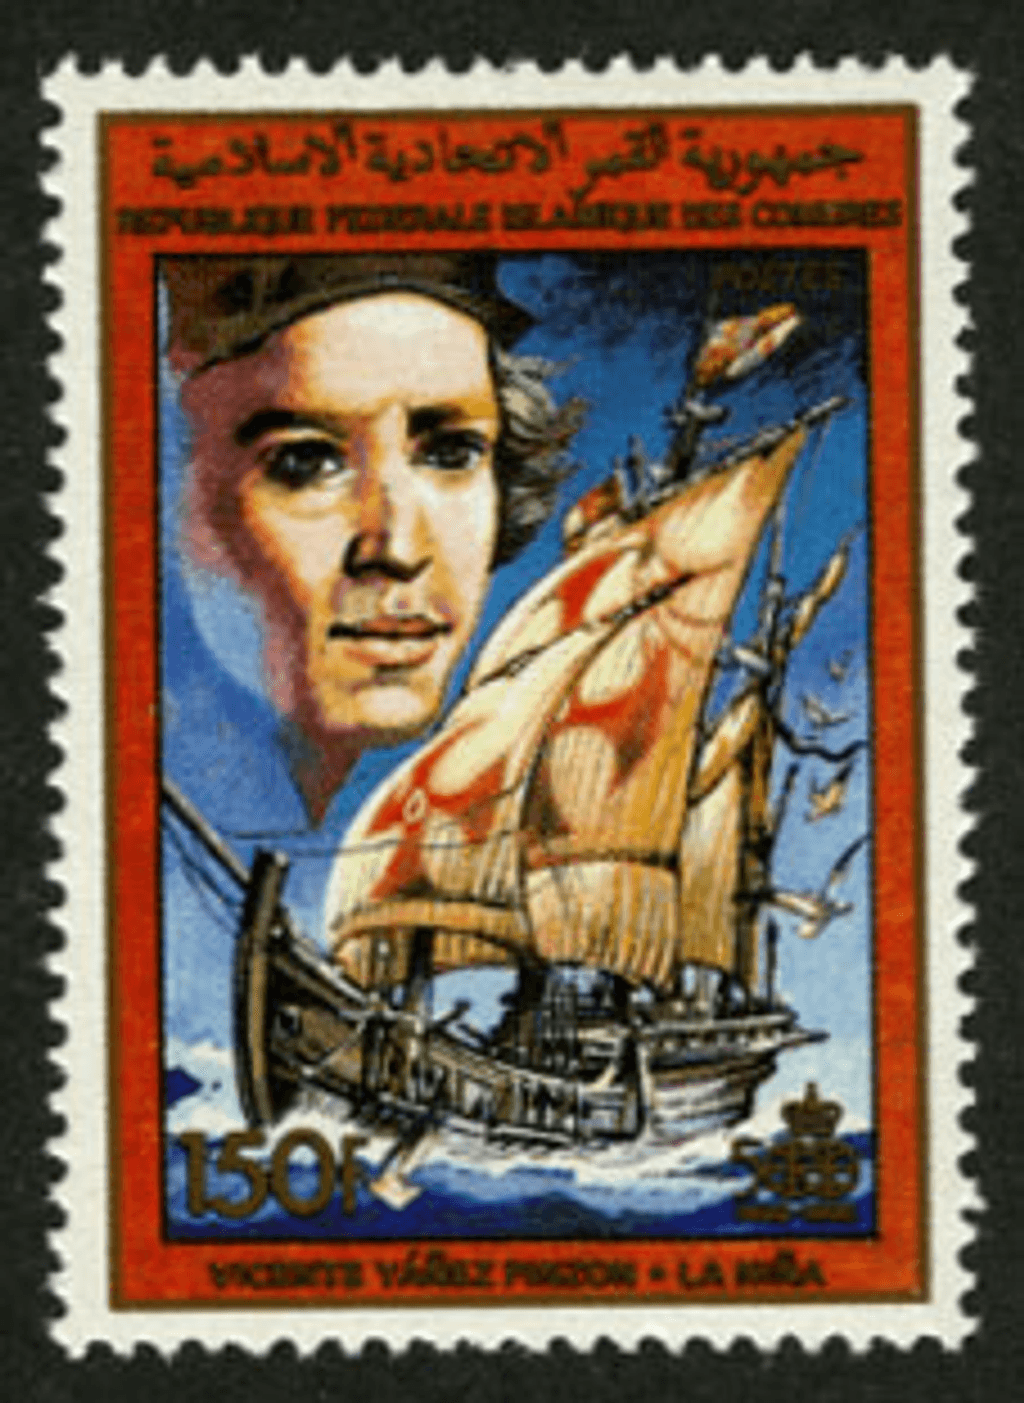 Christopher Columbus / Discovery of America